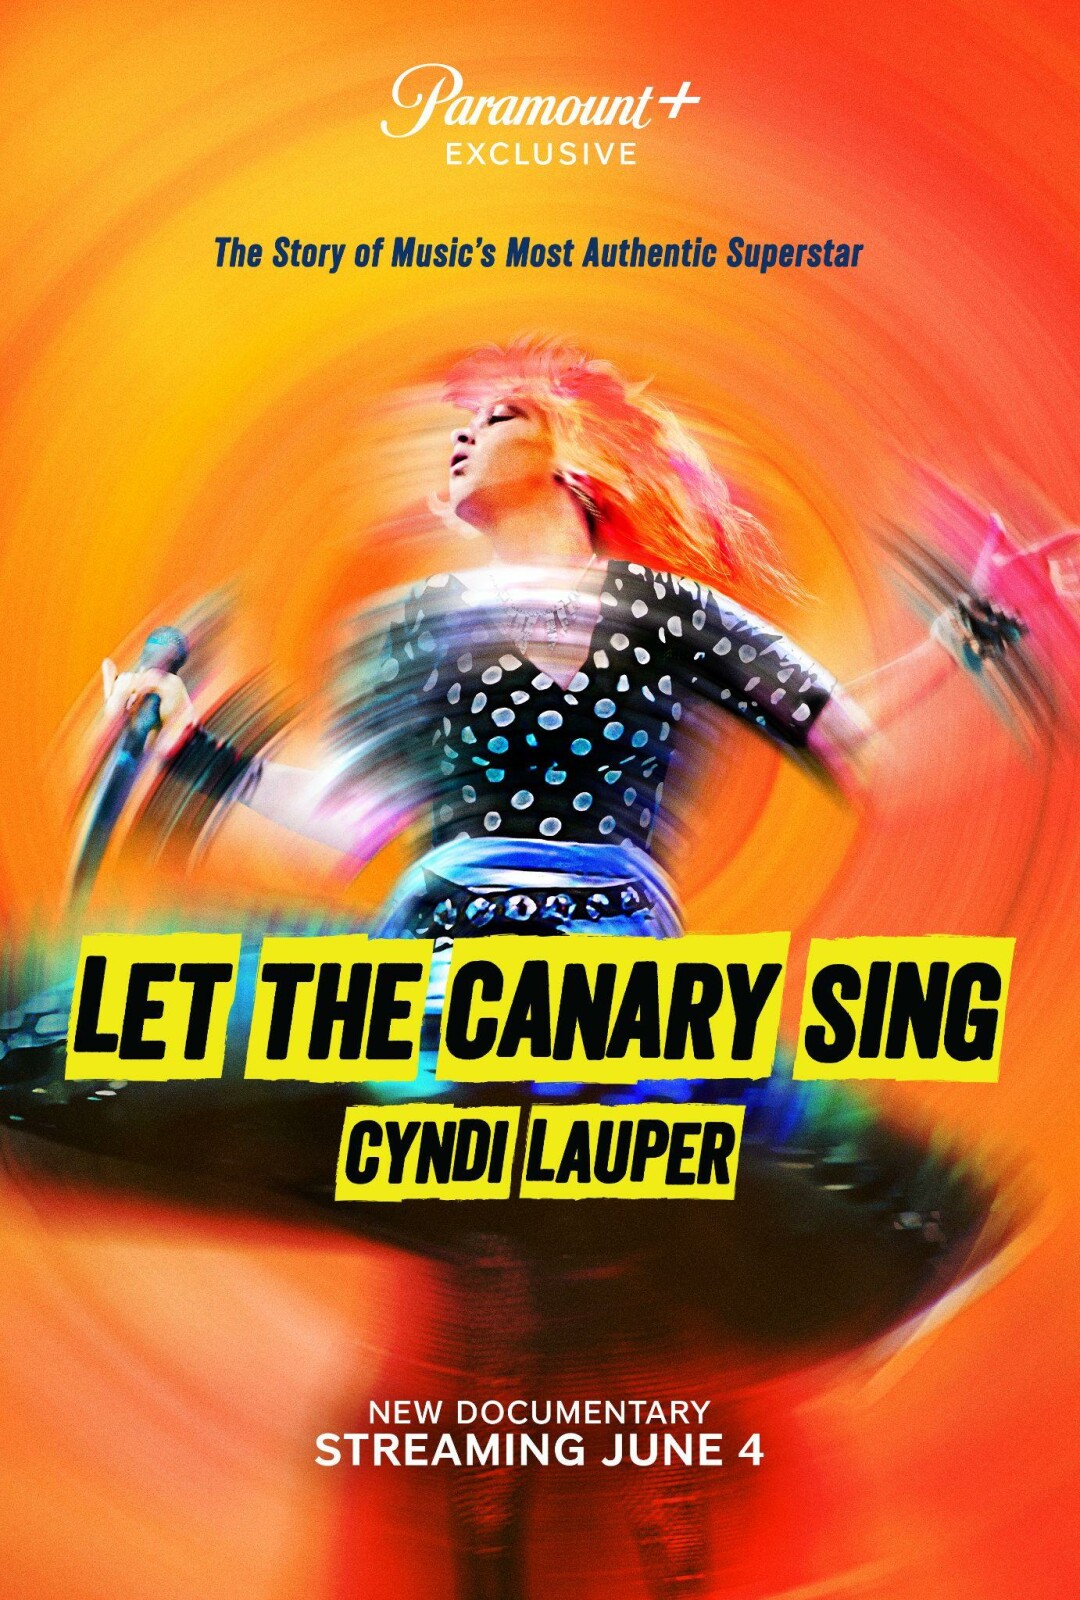 Paramount+ Announces New Cyndi Lauper Documentary "Let The Canary Sing" to Premiere June 4